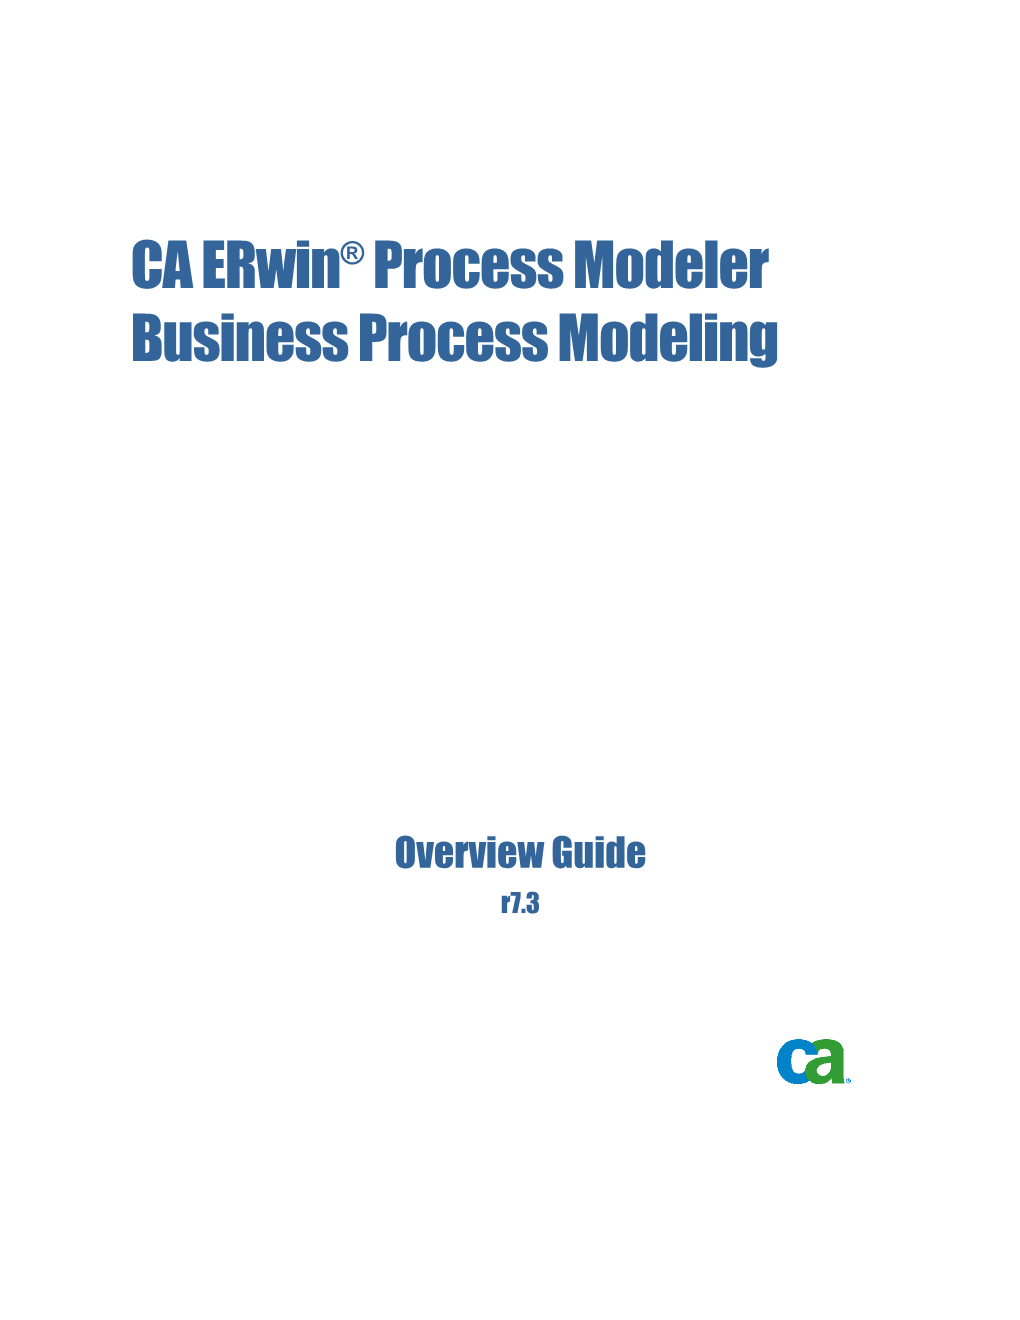 Business Process Modeling Overview Guide